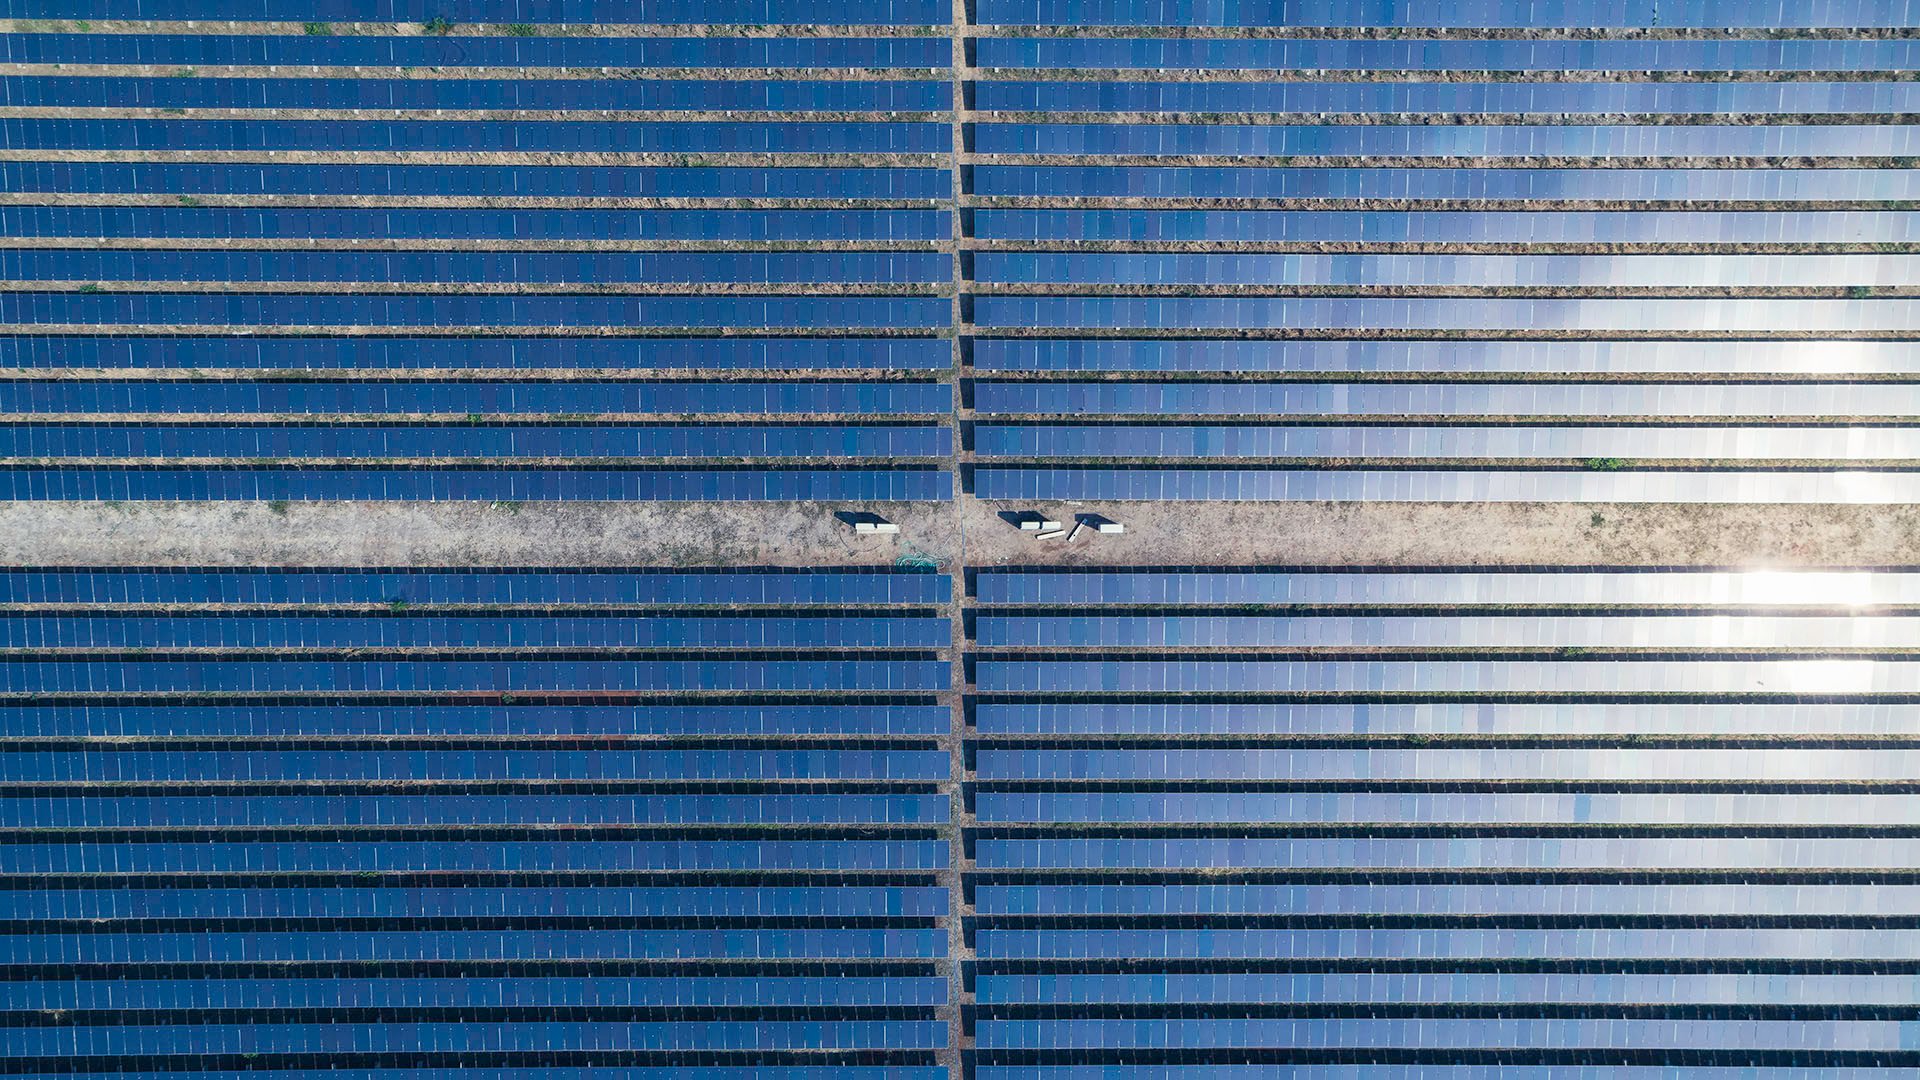 Rows of solar panels in the sun